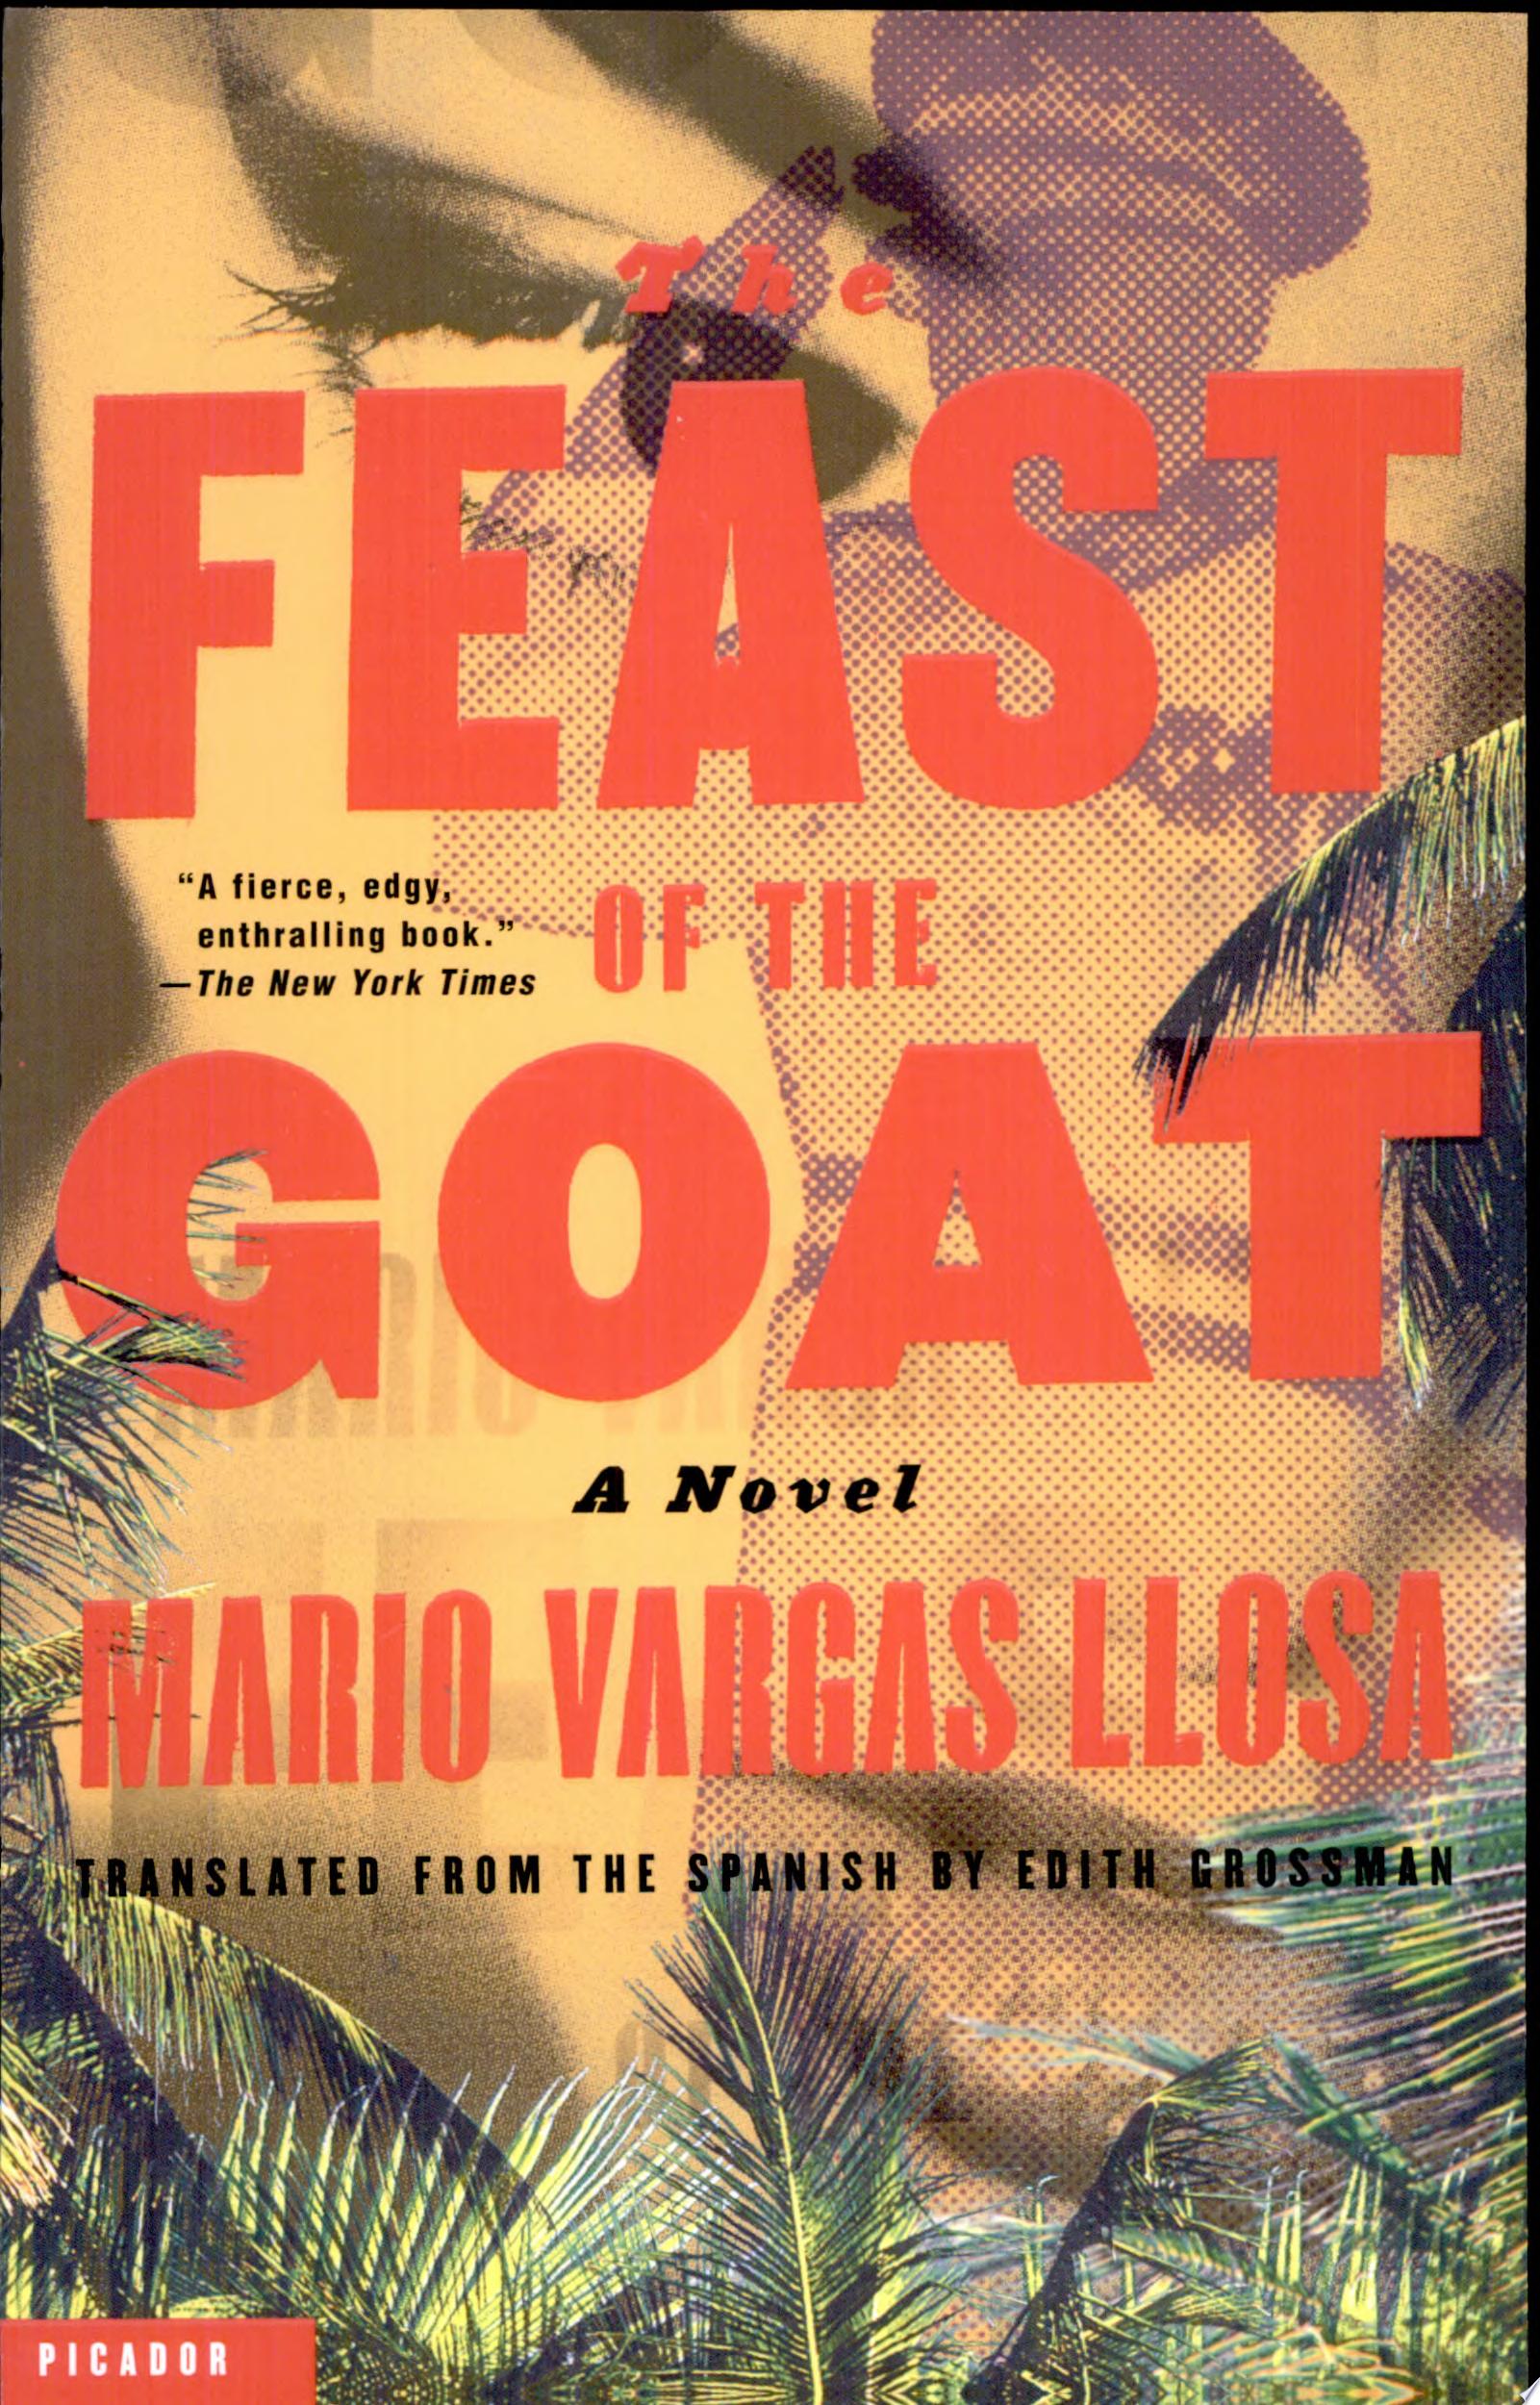 Image for "The Feast of the Goat"